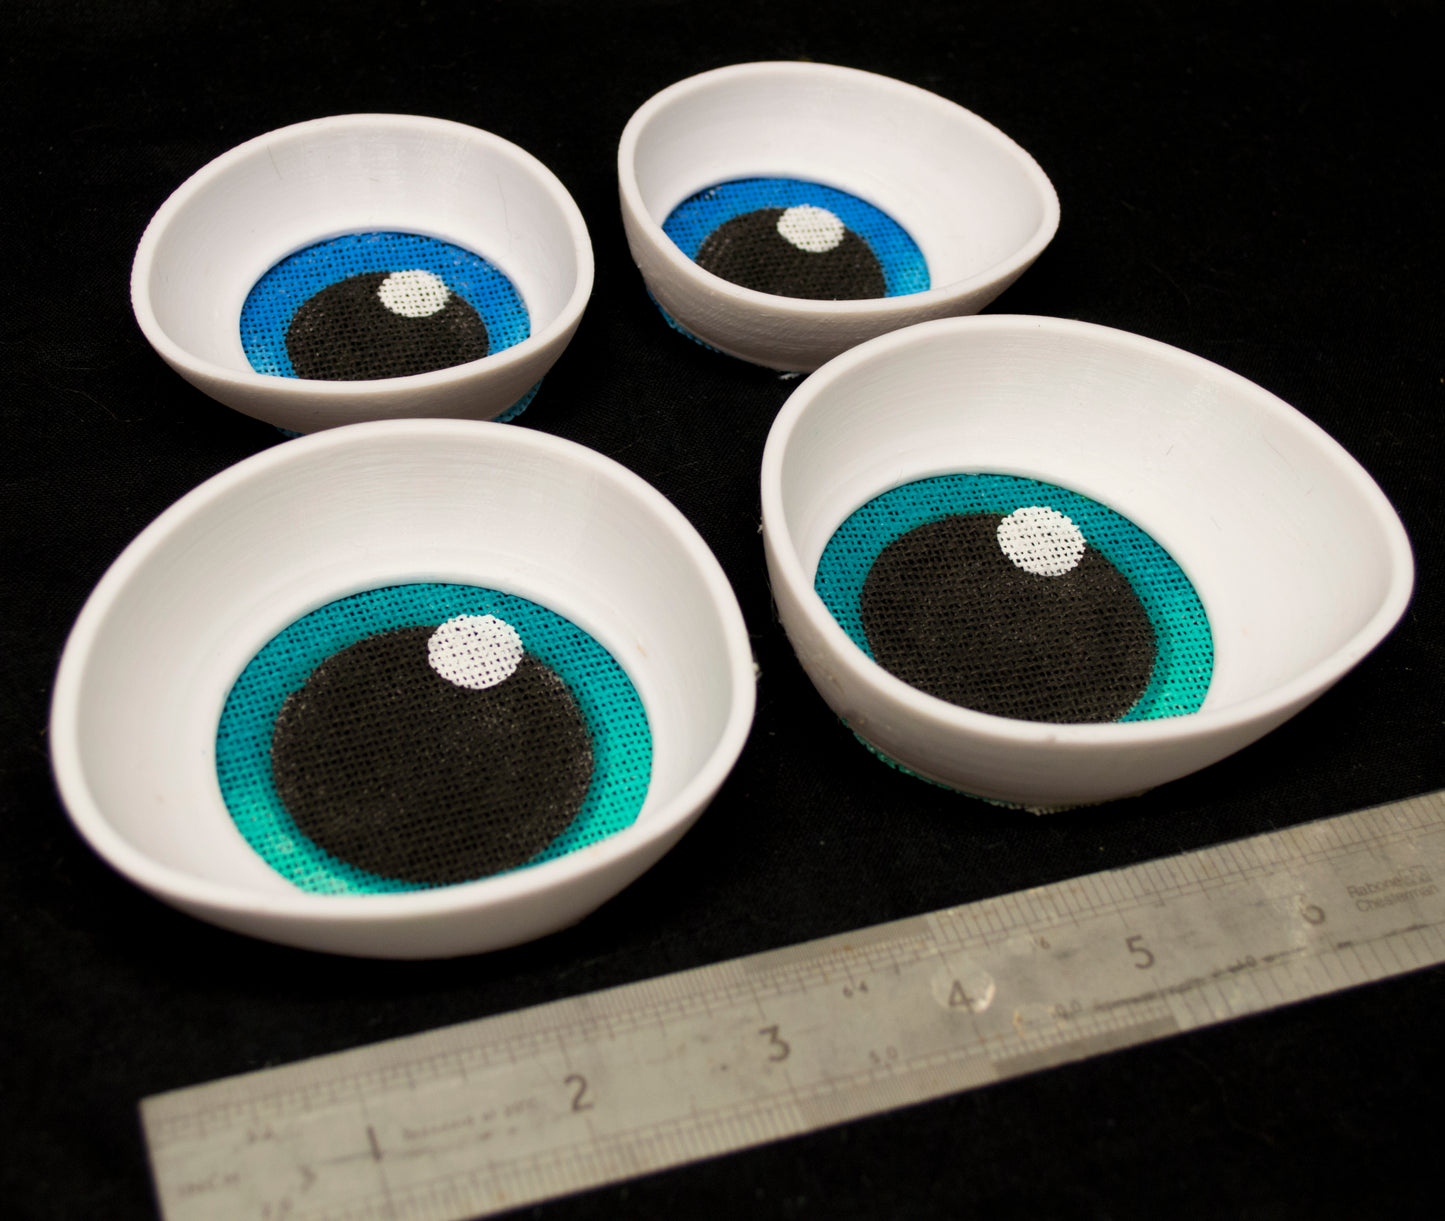 Custom painted Toony eyes for costumes, (regular and large options) fursuits and mascots (1 pair) Waterproof